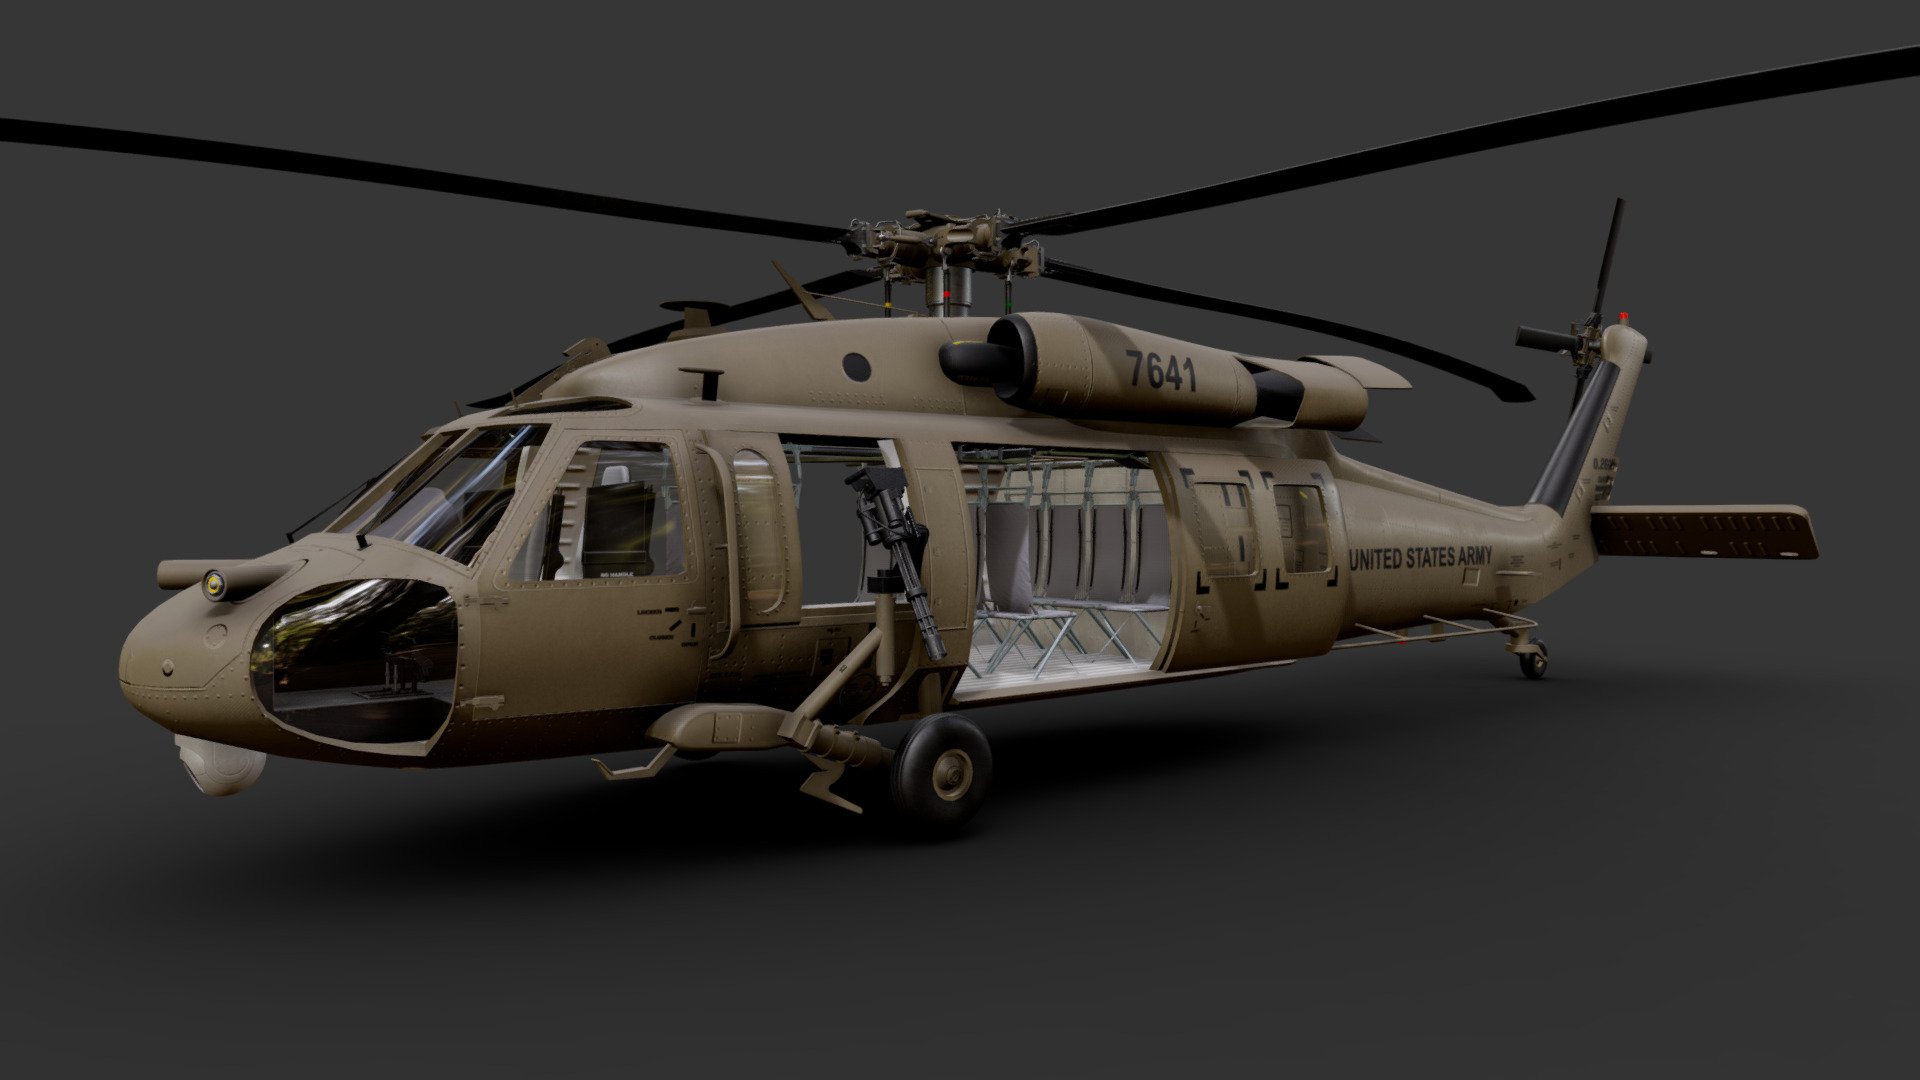 UH-60 Black Hawk US Army




Detailed cockpit instruments

Baked textures

8k textures for main body 

4k textures for everyting else

This model also Includes the following textures skins




U.S Customs and Border Protection

Ambulance

U.S Coast Guard

U.S Navy

Colombian Police

L.A County Fire

US Army
 - Sikorsky UH-60 Black Hawk US Army - Buy Royalty Free 3D model by luisbcompany 3d model